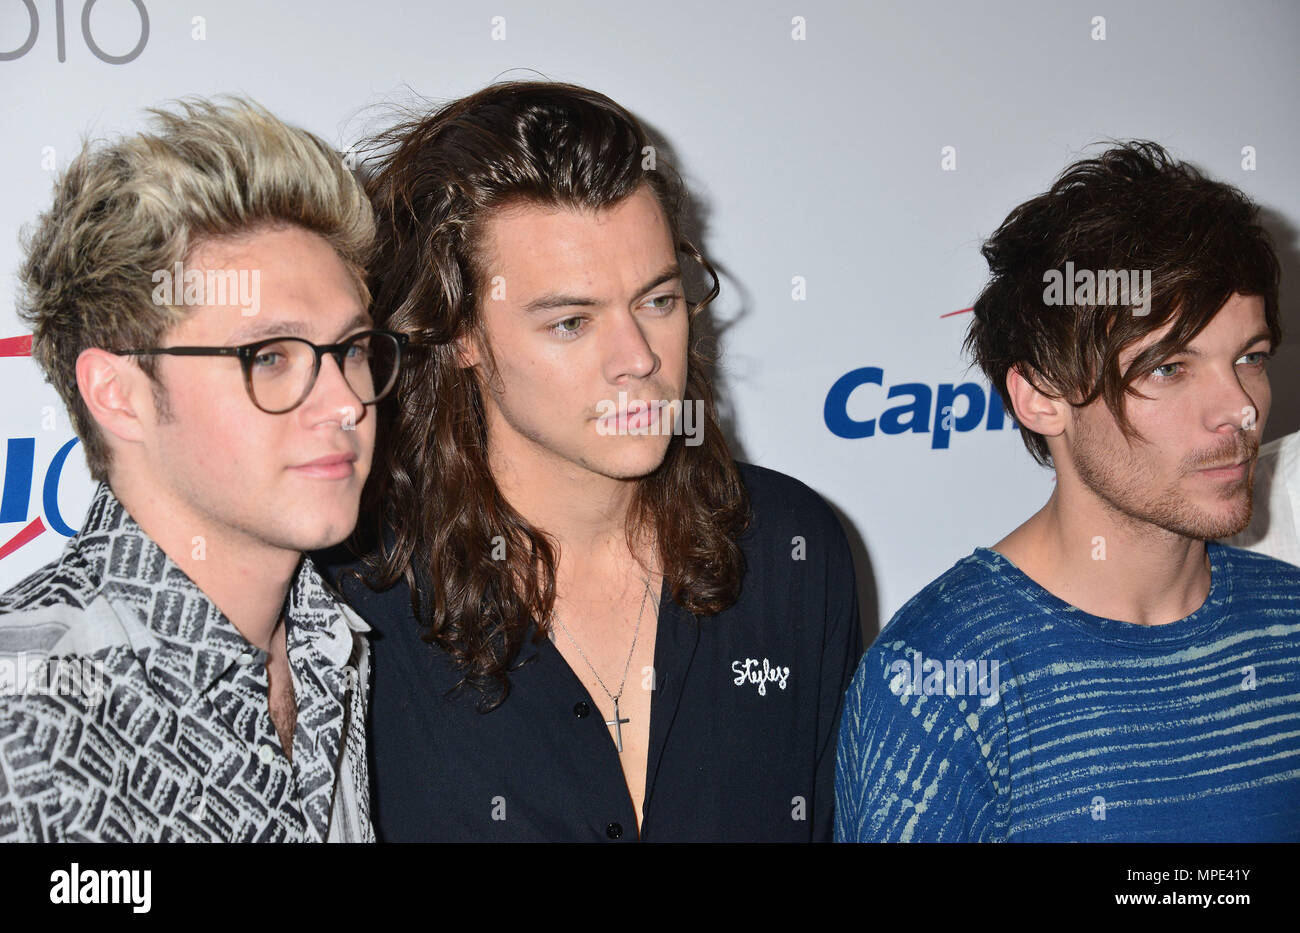 Niall Horan, Harry Styles, Louis Tomlinson and Liam Payne of One Direction  049 at the iHeartRadio Jingle Ball KIIS FM at the Staples Center in Los  Angeles. December 4, 2015.One Direction 049